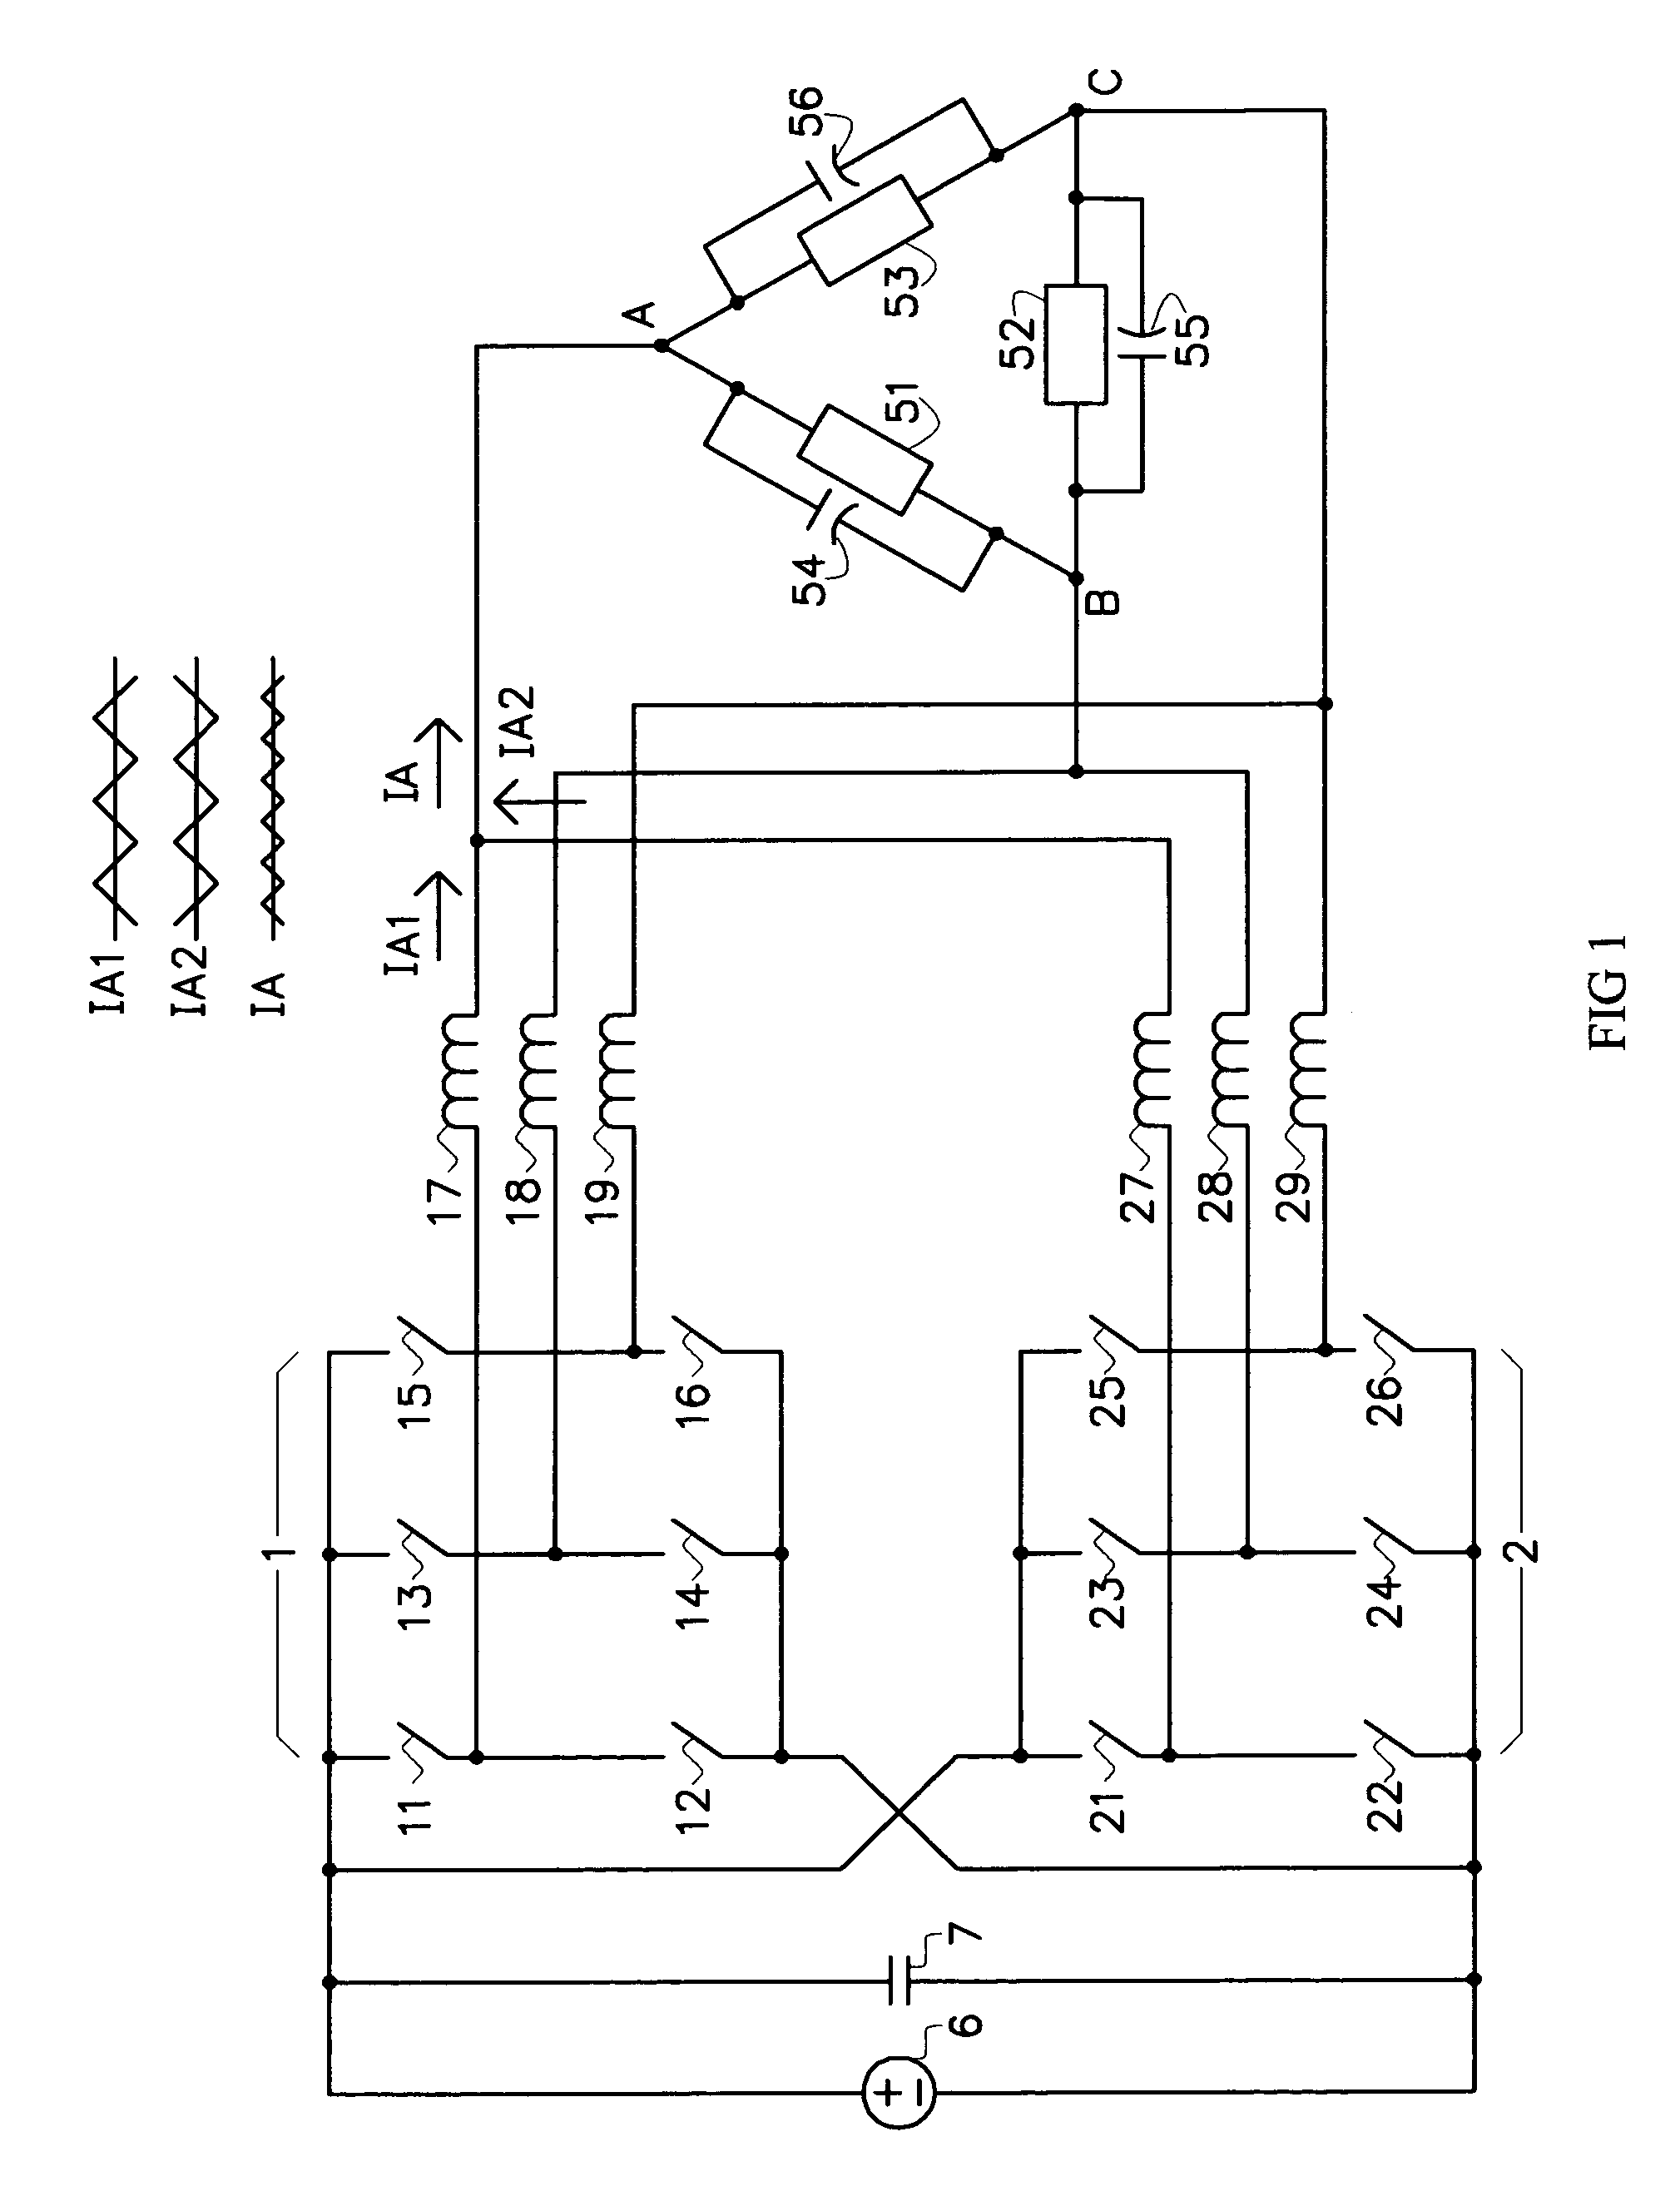 Power converter with ripple current cancellation using skewed switching techniques